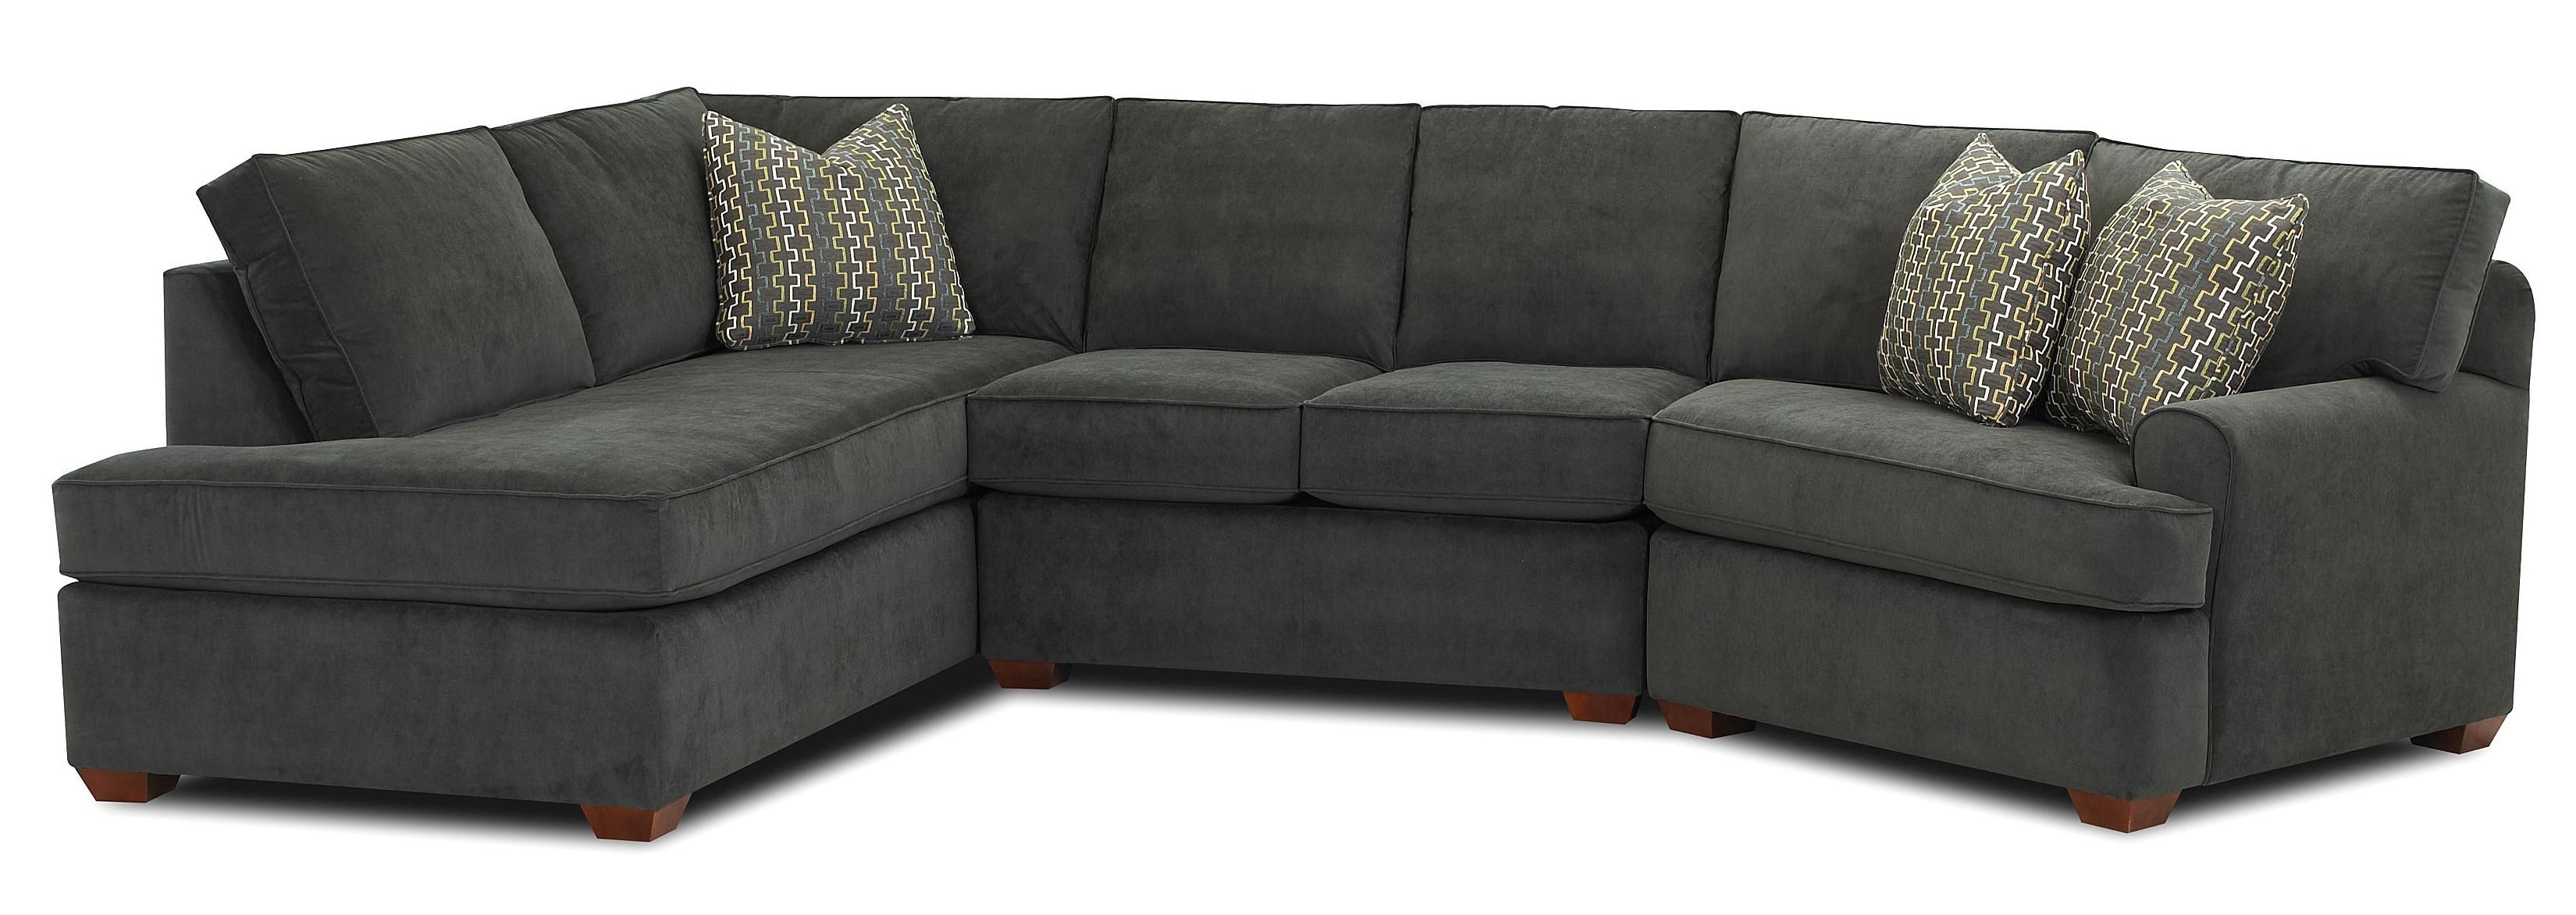 Sectional Sofa With Left Facing Sofa Chaise | Redecoration Project Intended For Nova Scotia Sectional Sofas (View 8 of 10)